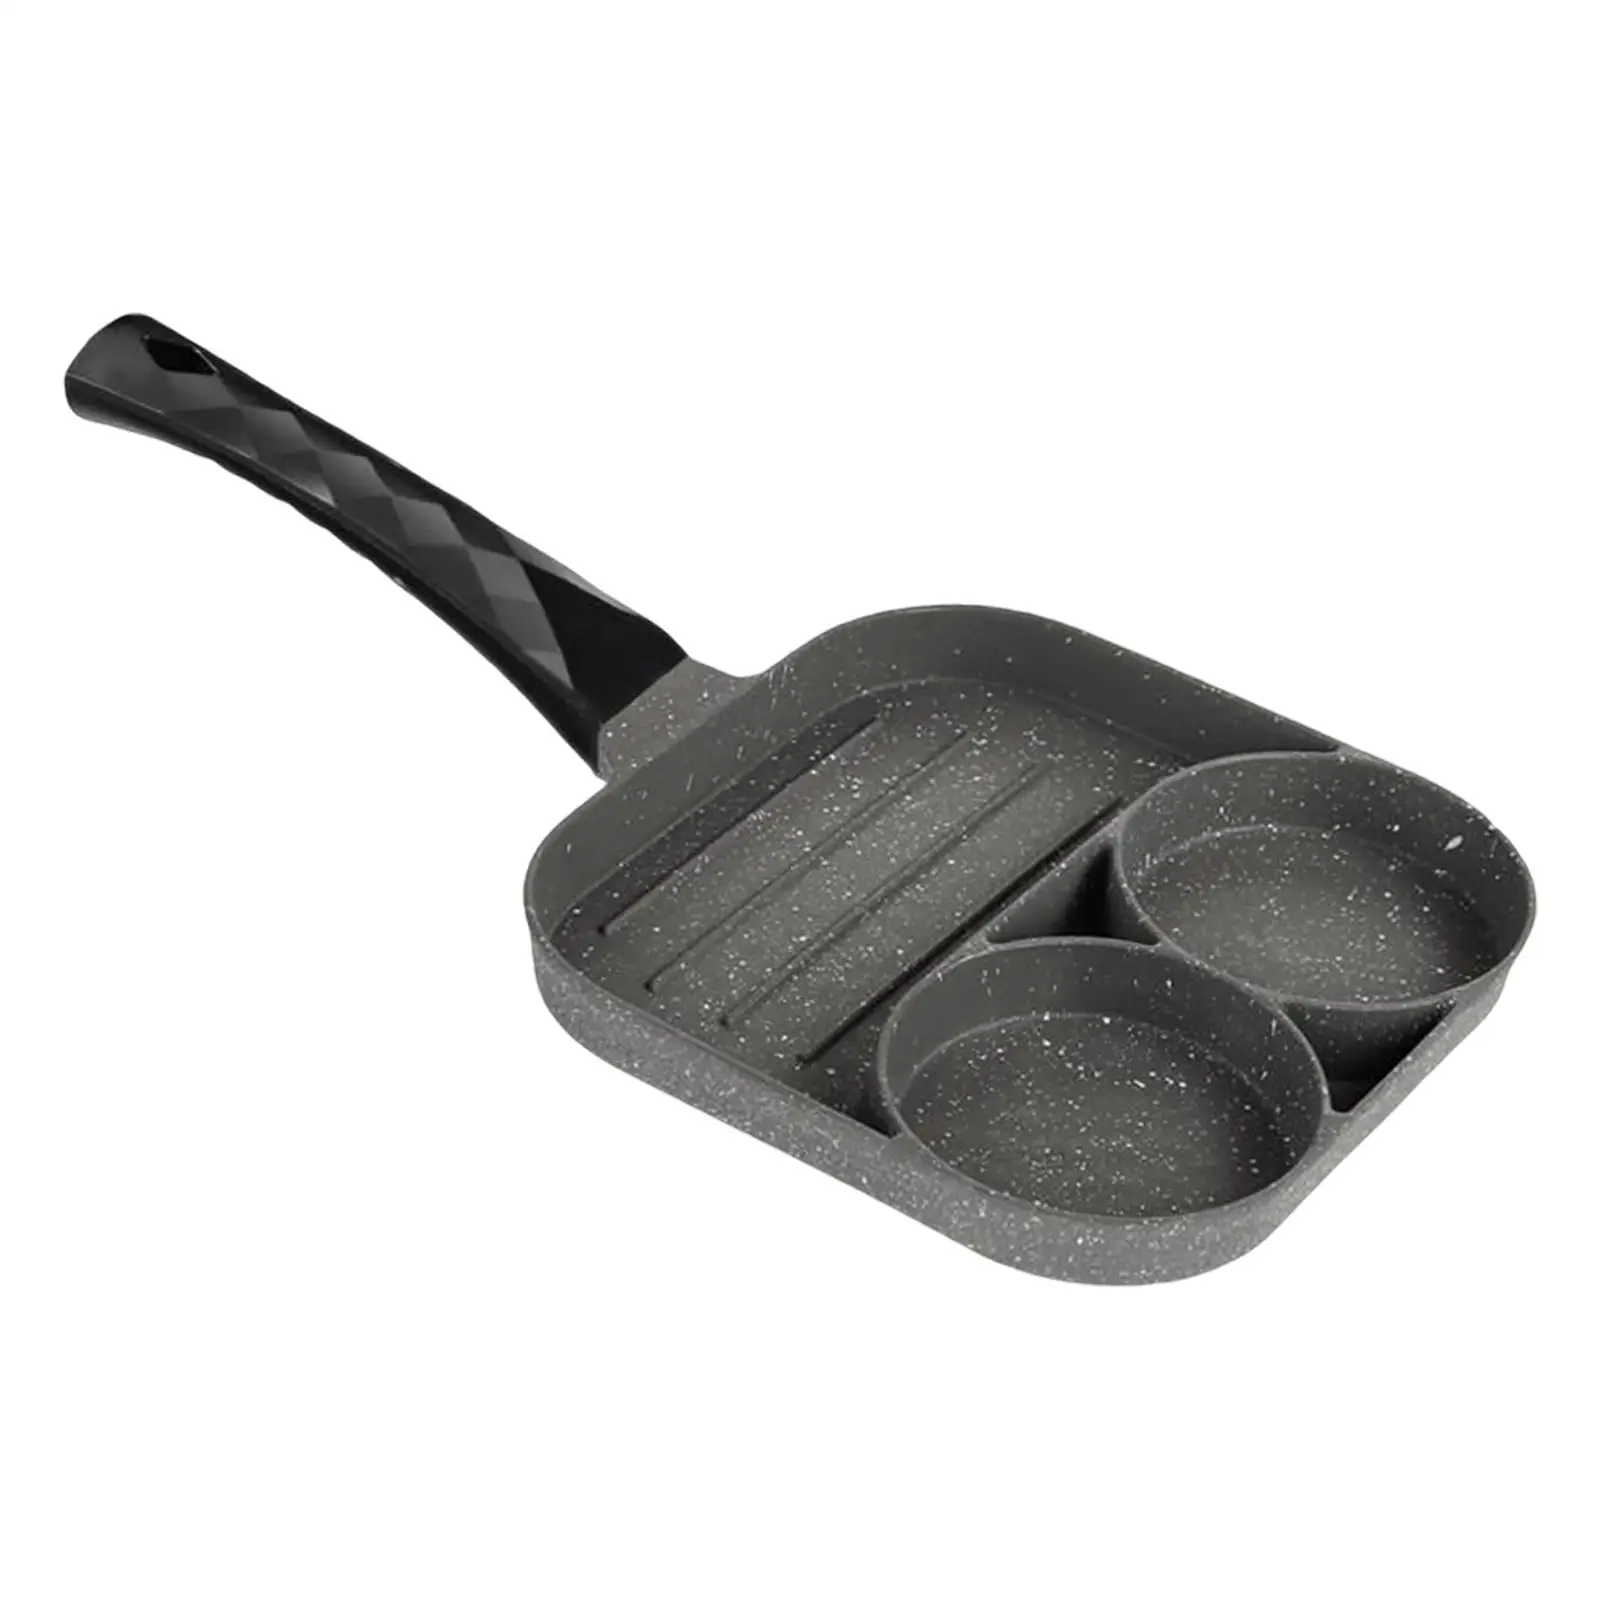 Small Breakfast Frying Grill Pot Fried Egg Cooker Breakfast Maker Cookware Egg Frying Pan Induction Omelet Pan Cooking